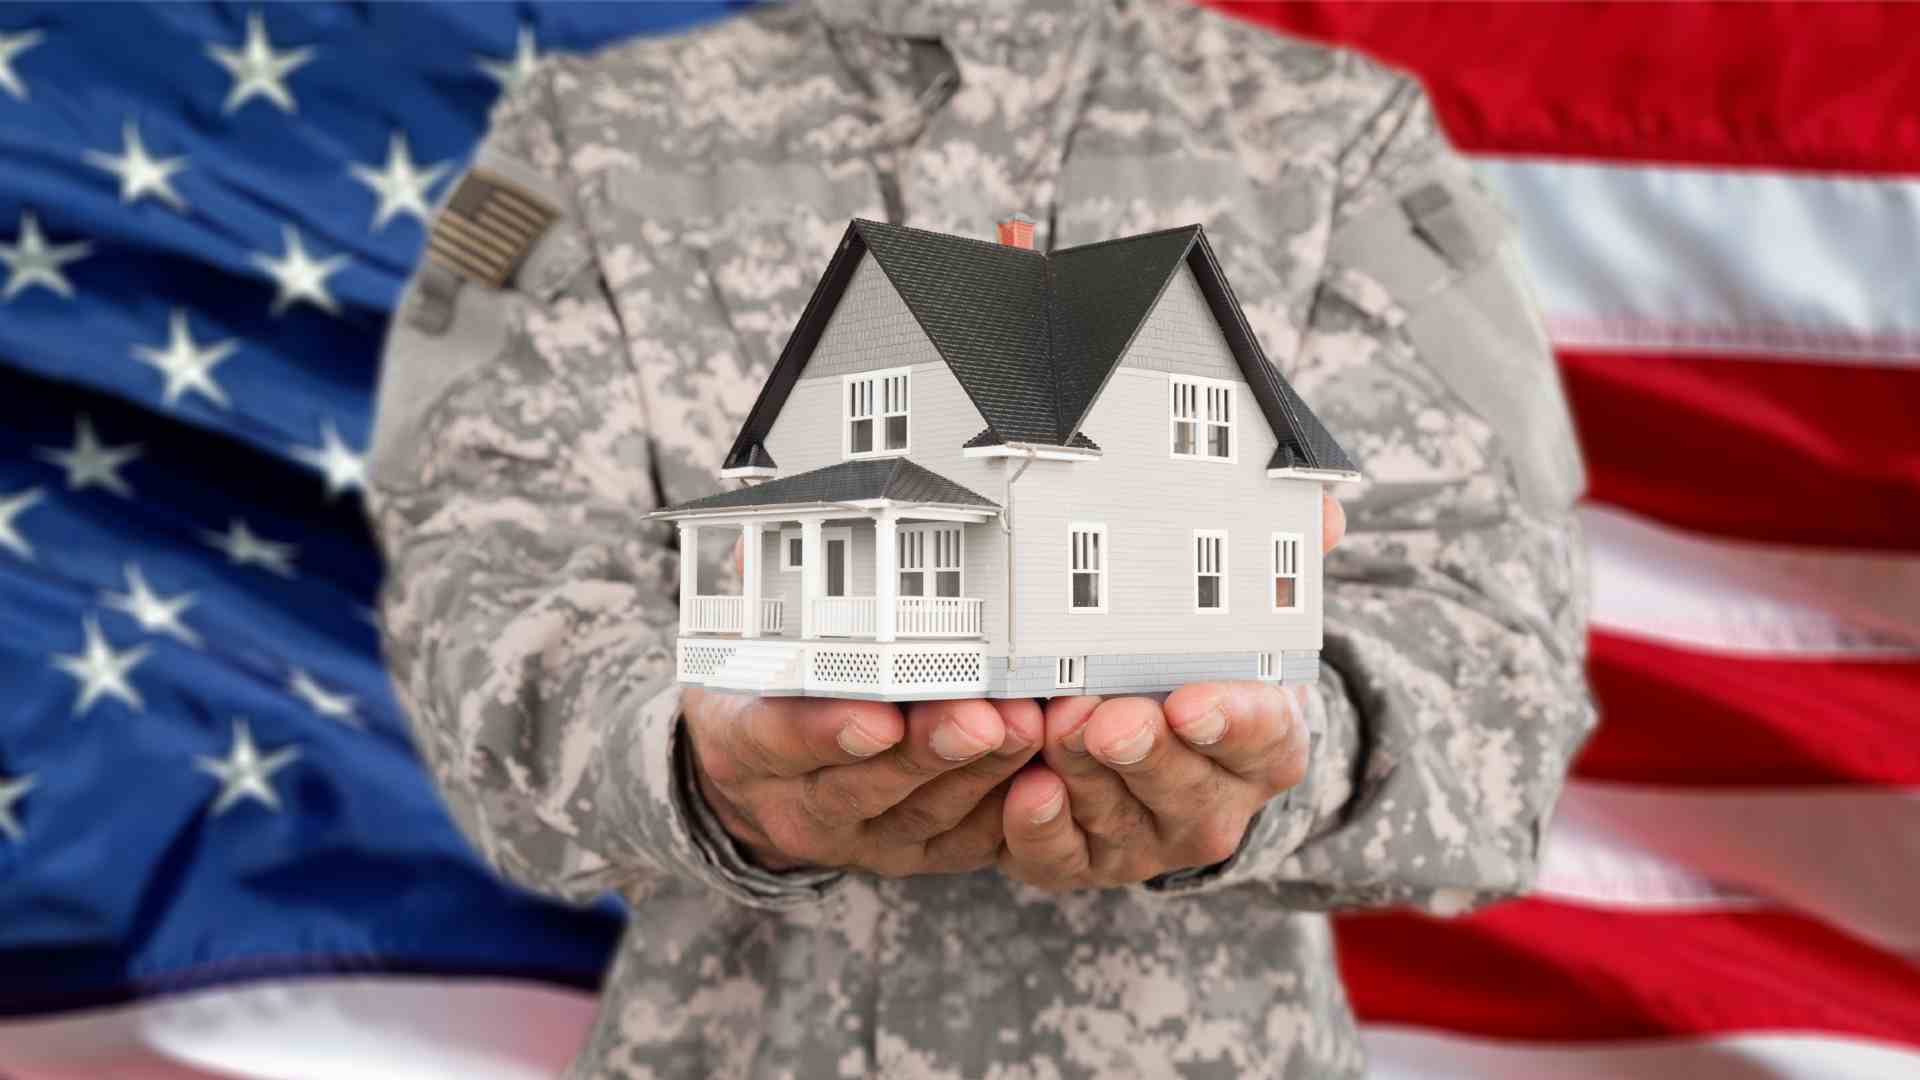 VA Home Loan Specialists: Expert Guidance for Veterans, Benefits of Working with a VA Home Loan Specialist: